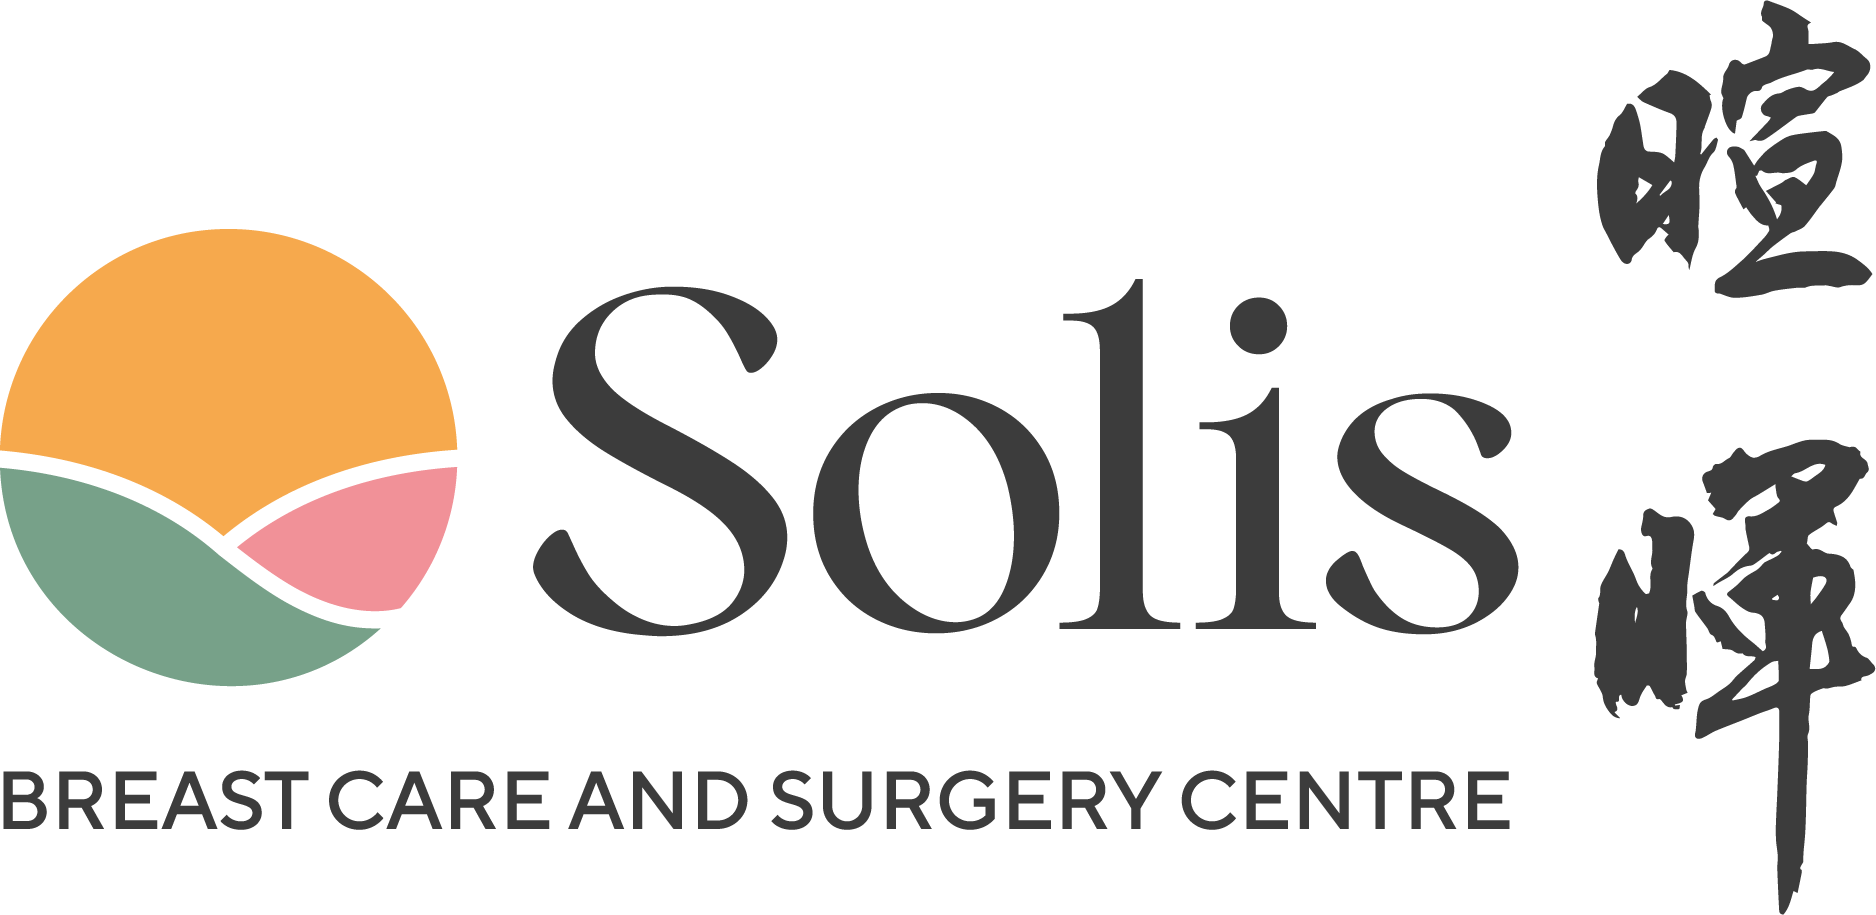 Solis Breast Care & Surgery - SG Breast Surgeons